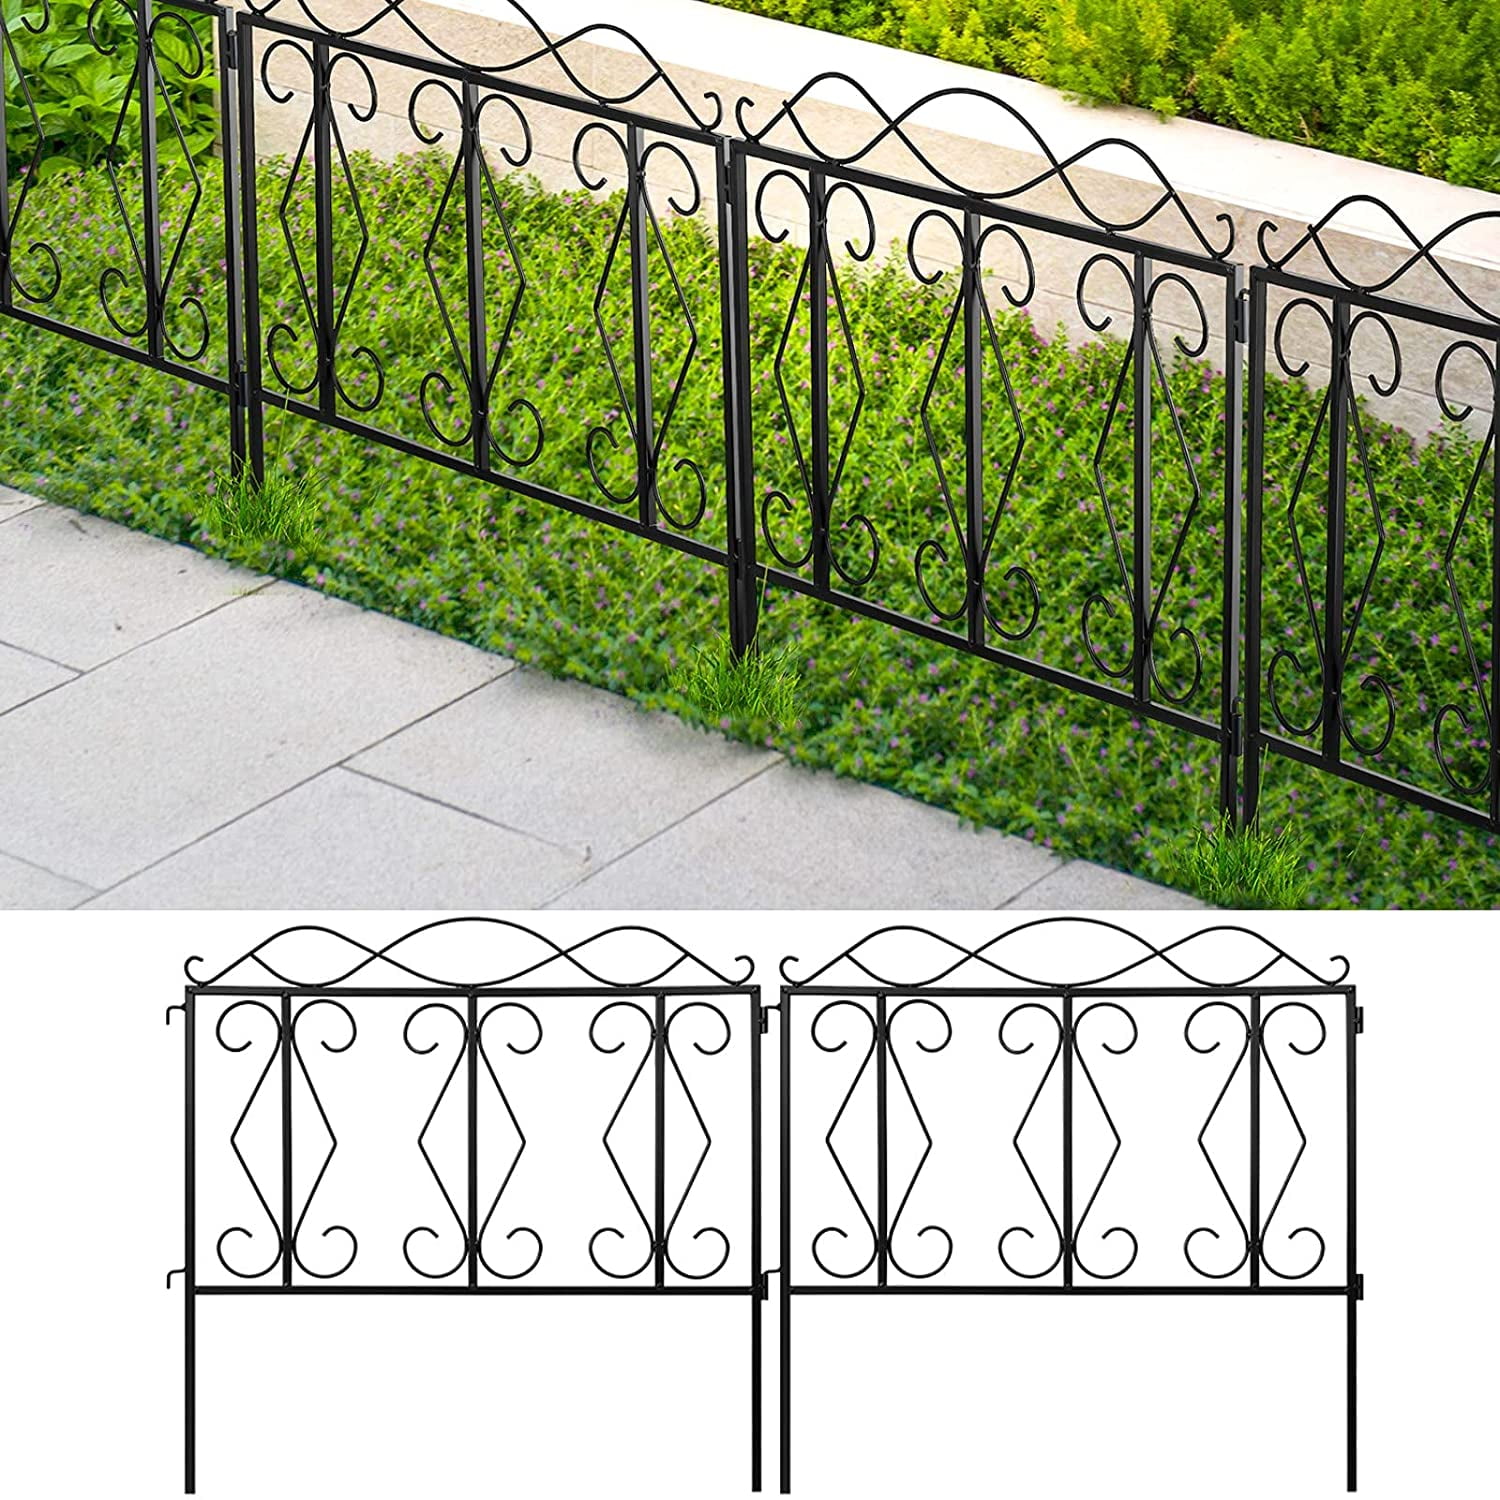 Amagabeli 18in x 7.5ft Decorative Garden Fence Rustproof Coated Metal Outdoor Landscape Section Panel Decor Wire Border Fencing Folding Patio Wrought Iron Fencing Flower Barrier Picket Edge Black FC04 